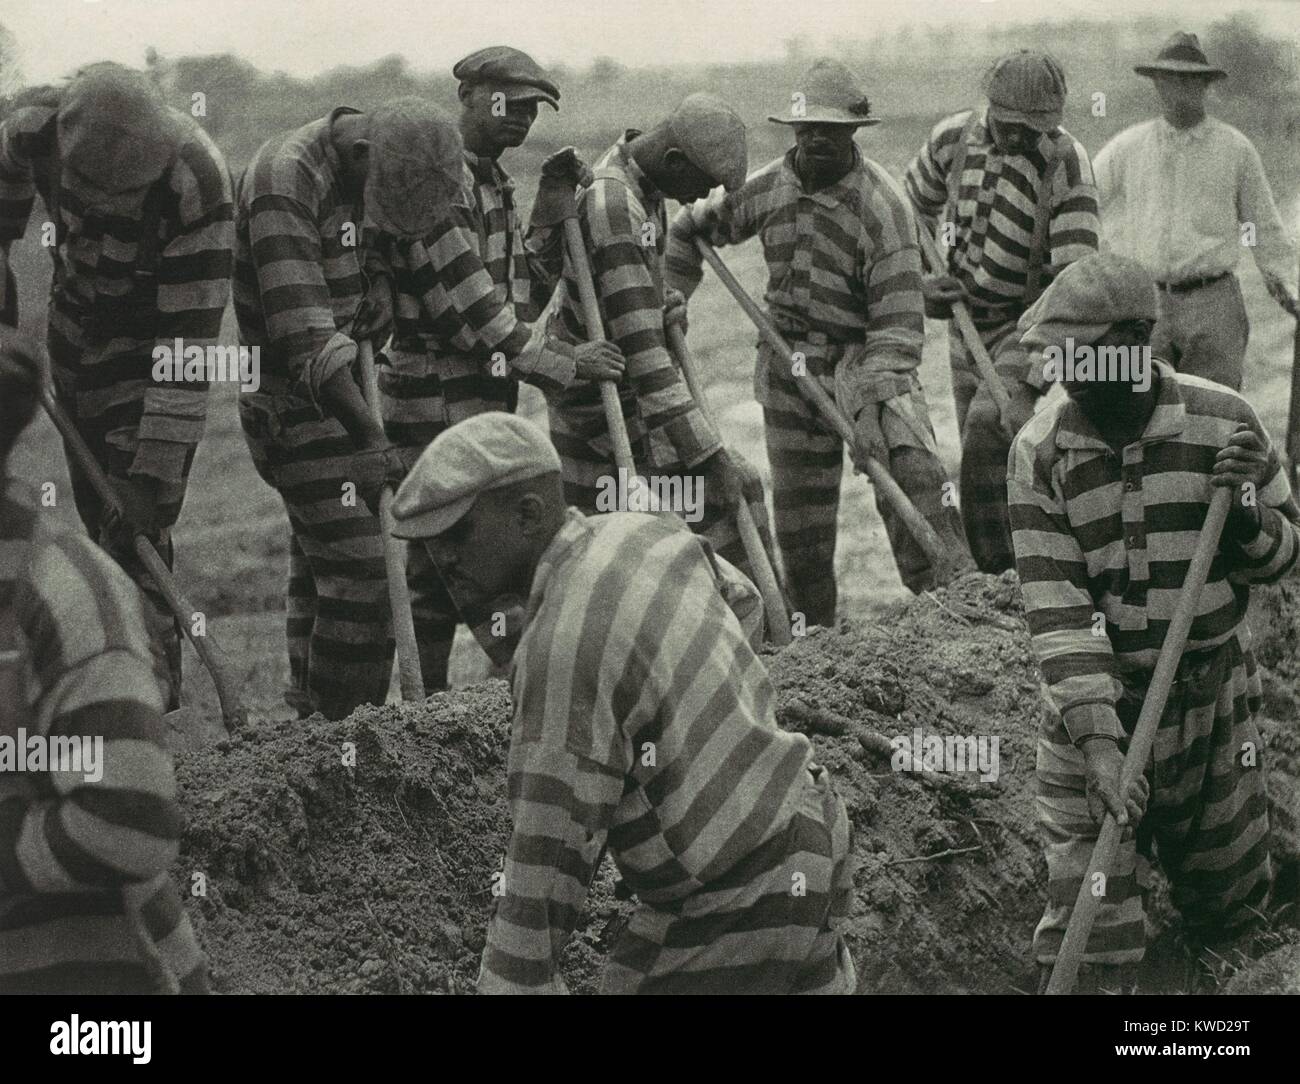 Prison Work Crew in the American South, 1929-30, by Doris Ulmann. The chain gang of 9 workers is digging, as one guard with a rifle looks on  (BSLOC 2017 20 73) Stock Photo